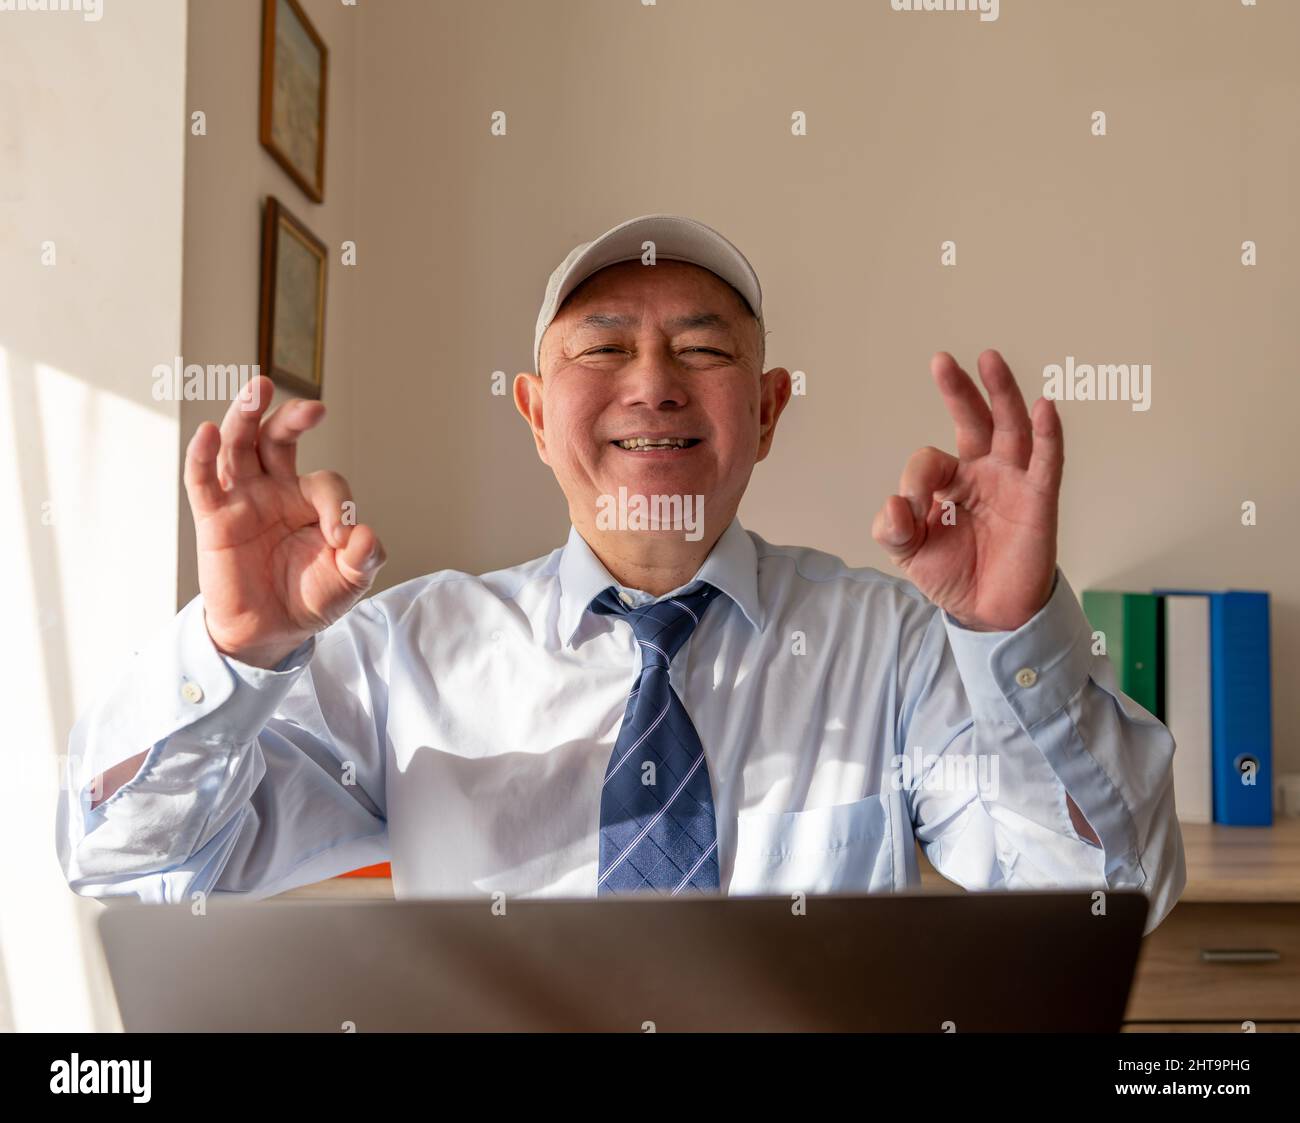 A senior smiling businessman giving the ok hand sign after closing a big business deal. Stock Photo